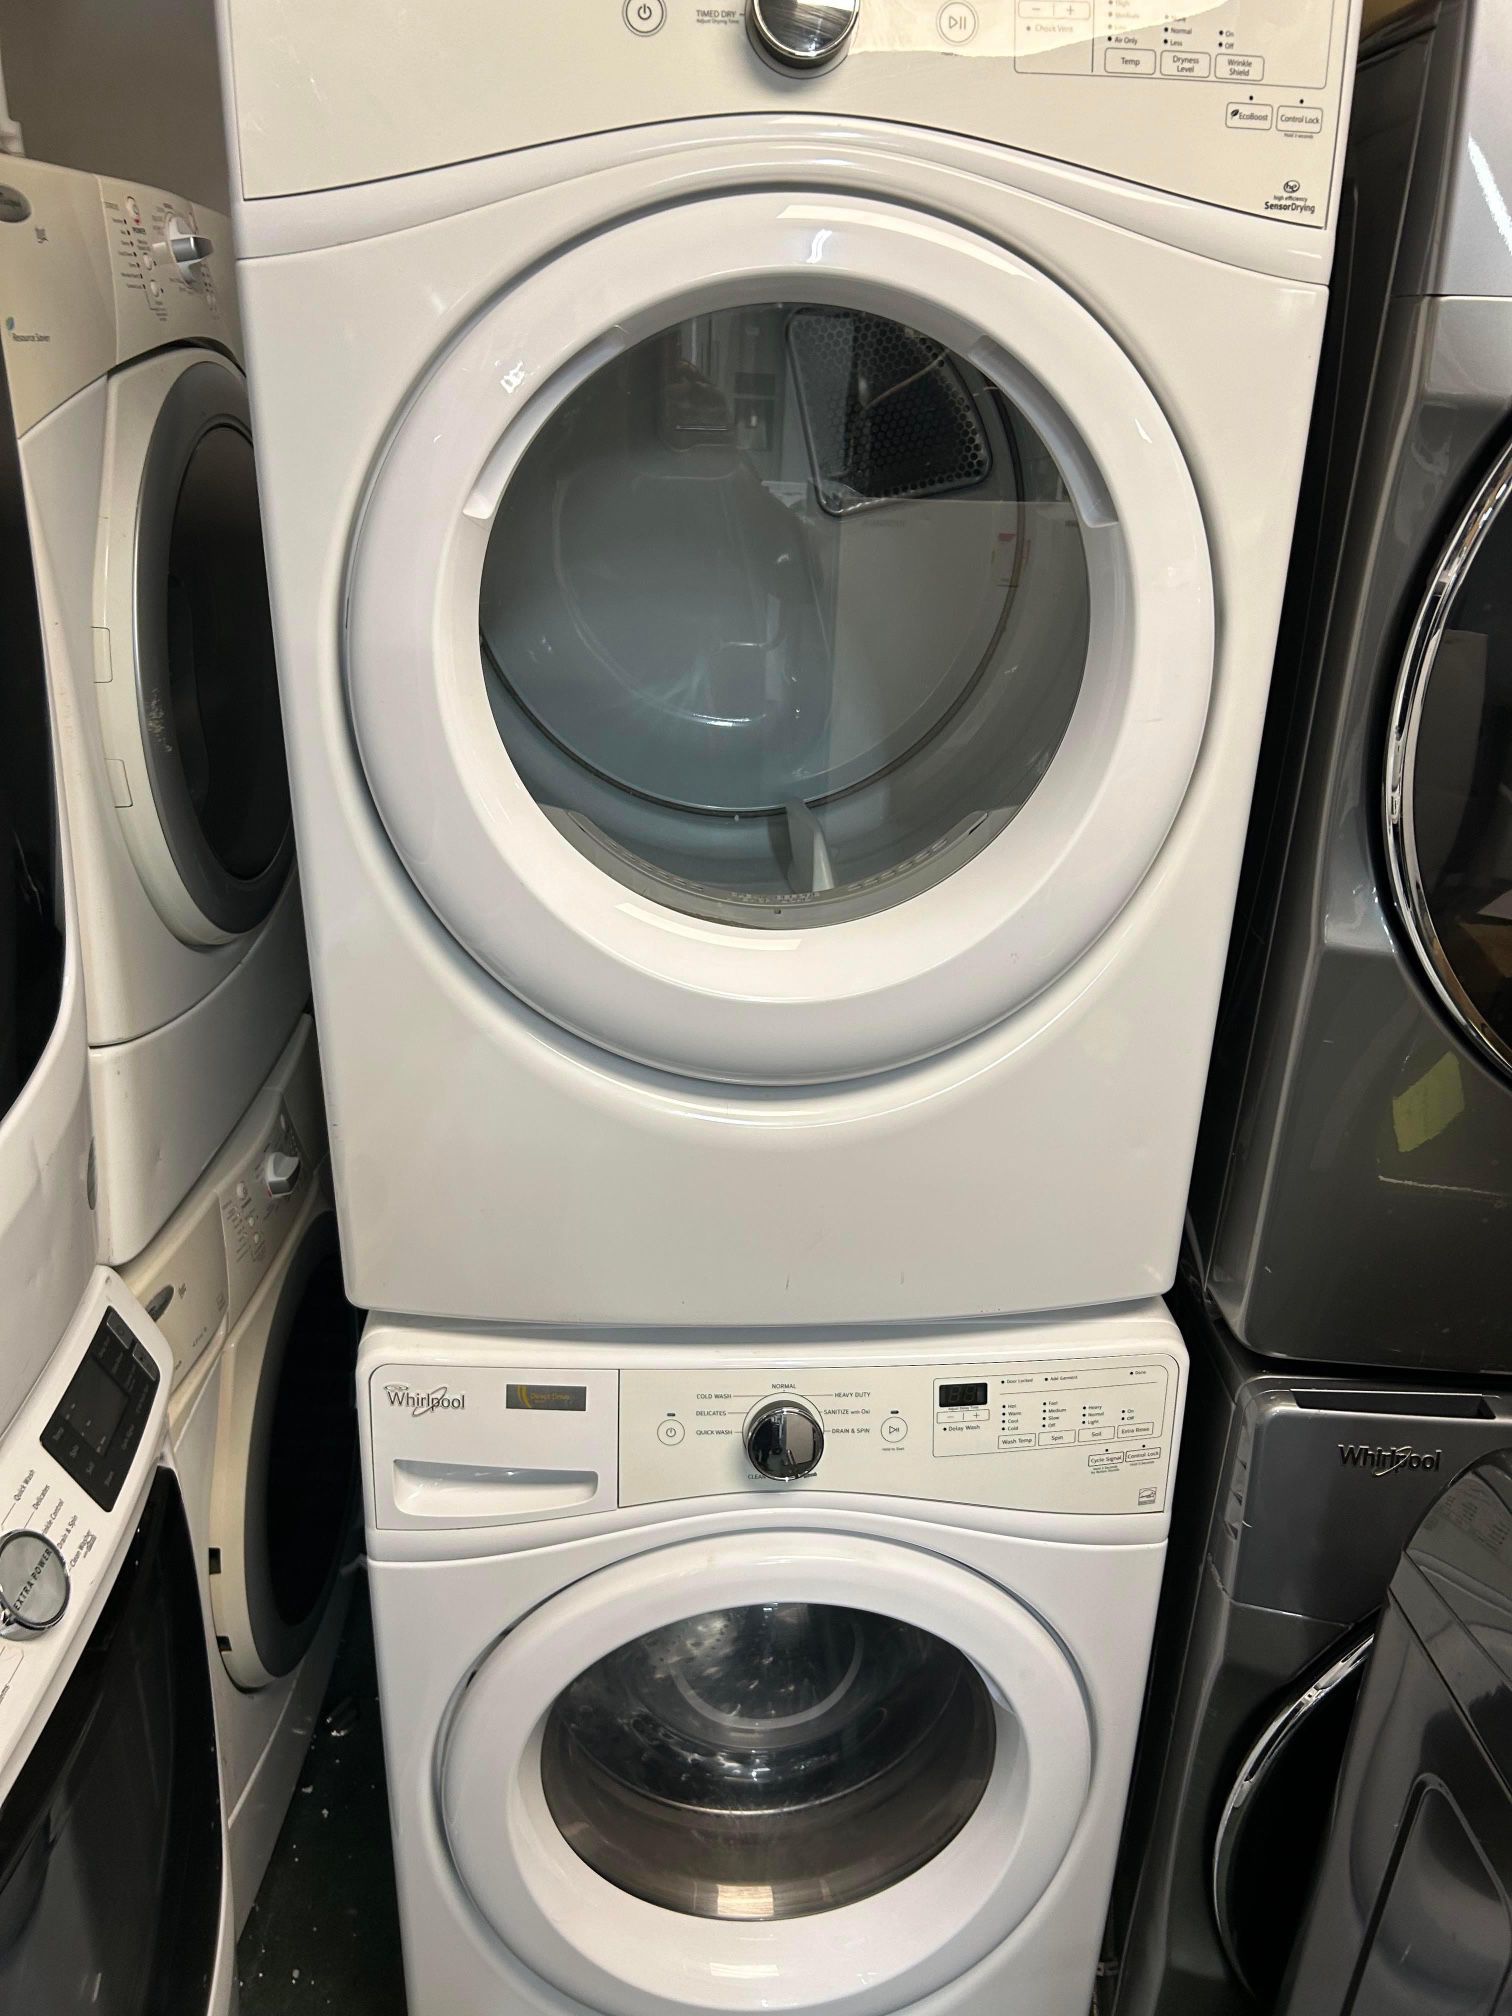 Whirlpool washer and dryer front loader set $600🔥